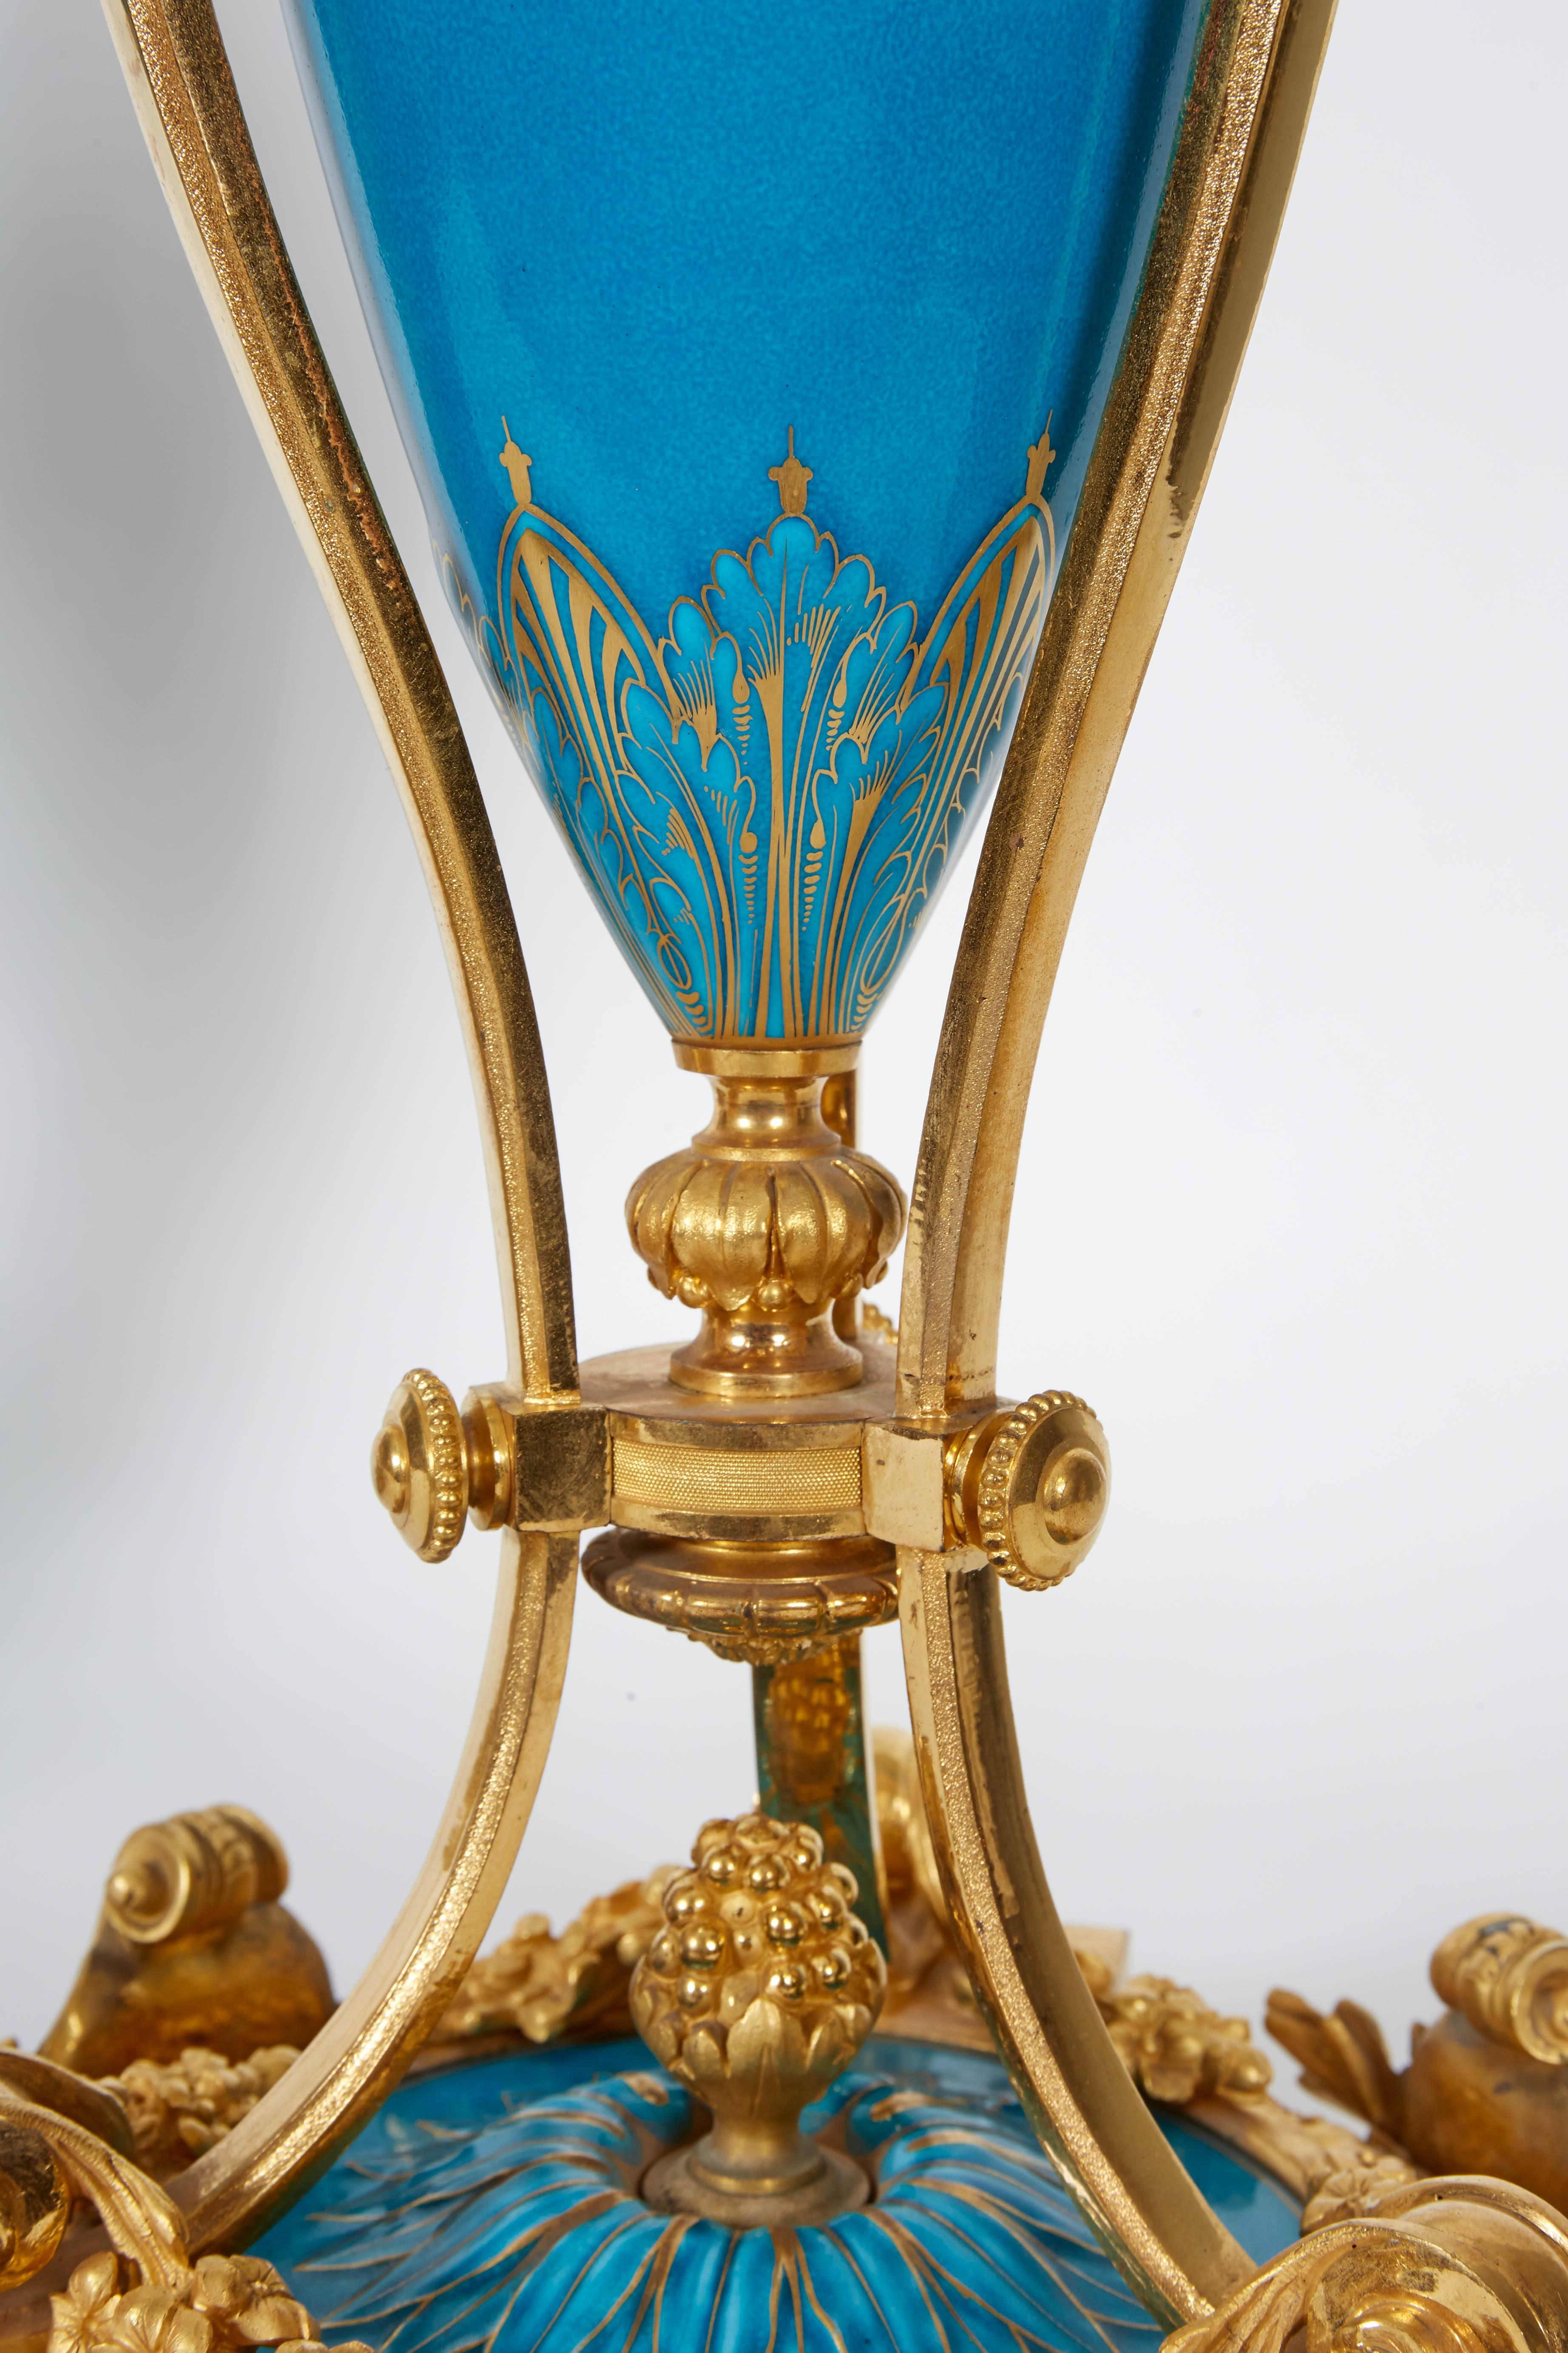 Exquisite Pair of French Ormolu and Turquoise Sevres Porcelain Candelabra 3